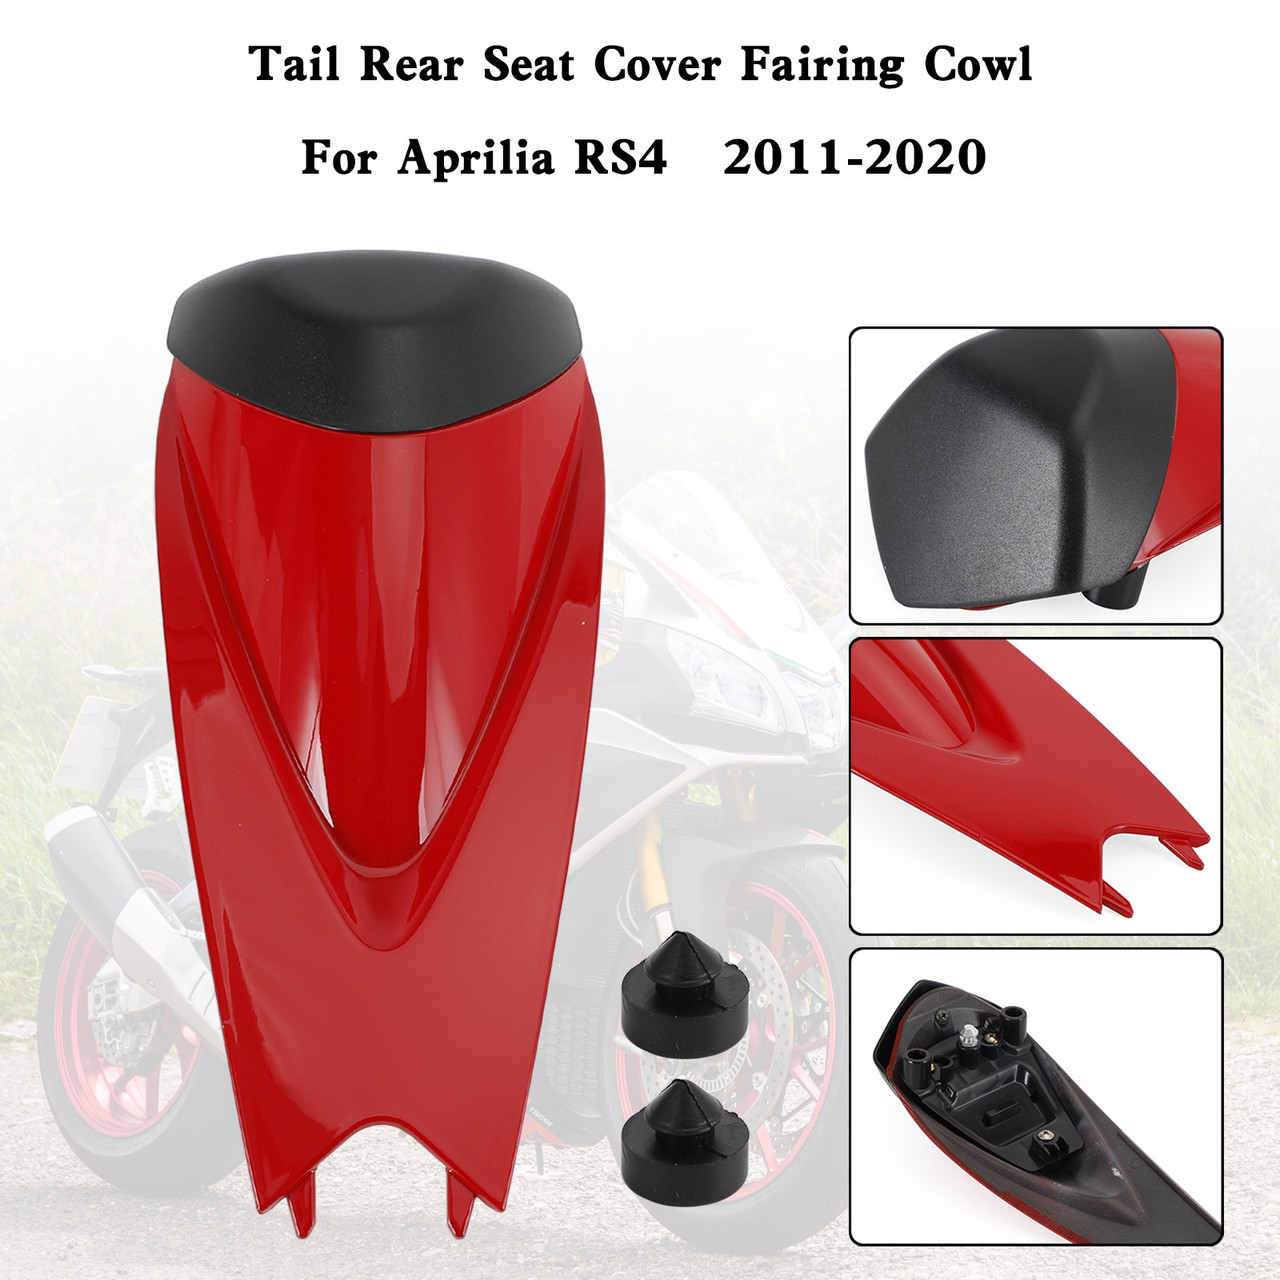 Rear Seat Cover Fairing Cowl for Aprilia RS4 RSV4 1000 2009-2022 RED